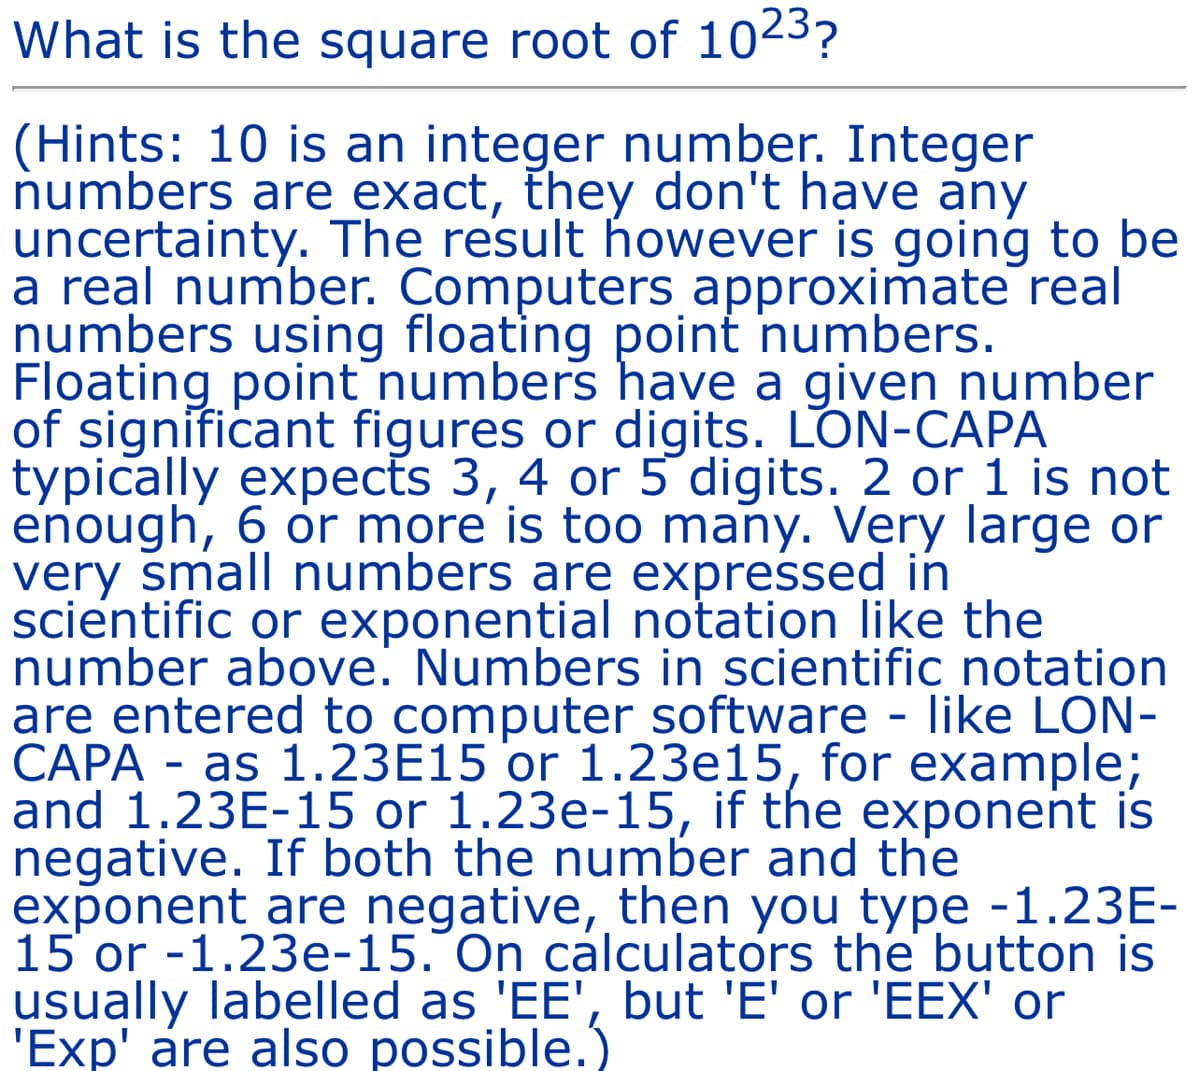 What is the square root of 1023?
(Hints: 10 is an integer number. Integer
numbers are exact, they don't have any
uncertainty. The result however is going to be
a real number. Computers approximate real
numbers using floating point numbers.
Floating point numbers have a given number
of significant figures or digits. LON-CAPA
typically expects 3, 4 or 5 digits. 2 or 1 is not
enough, 6 or more is too many. Very large or
very small numbers are expressed in
scientific or exponential notation like the
number above. Numbers in scientific notation
are entered to computer software - like LON-
CAPA as 1.23E15 or 1.23e15, for example;
and 1.23E-15 or 1.23e-15, if the exponent is
negative. If both the number and the
exponent are negative, then you type -1.23E-
15 or -1.23e-15. On calculators the button is
usually labelled as 'EE', but 'E' or 'EEX' or
'Exp' are also possible.)